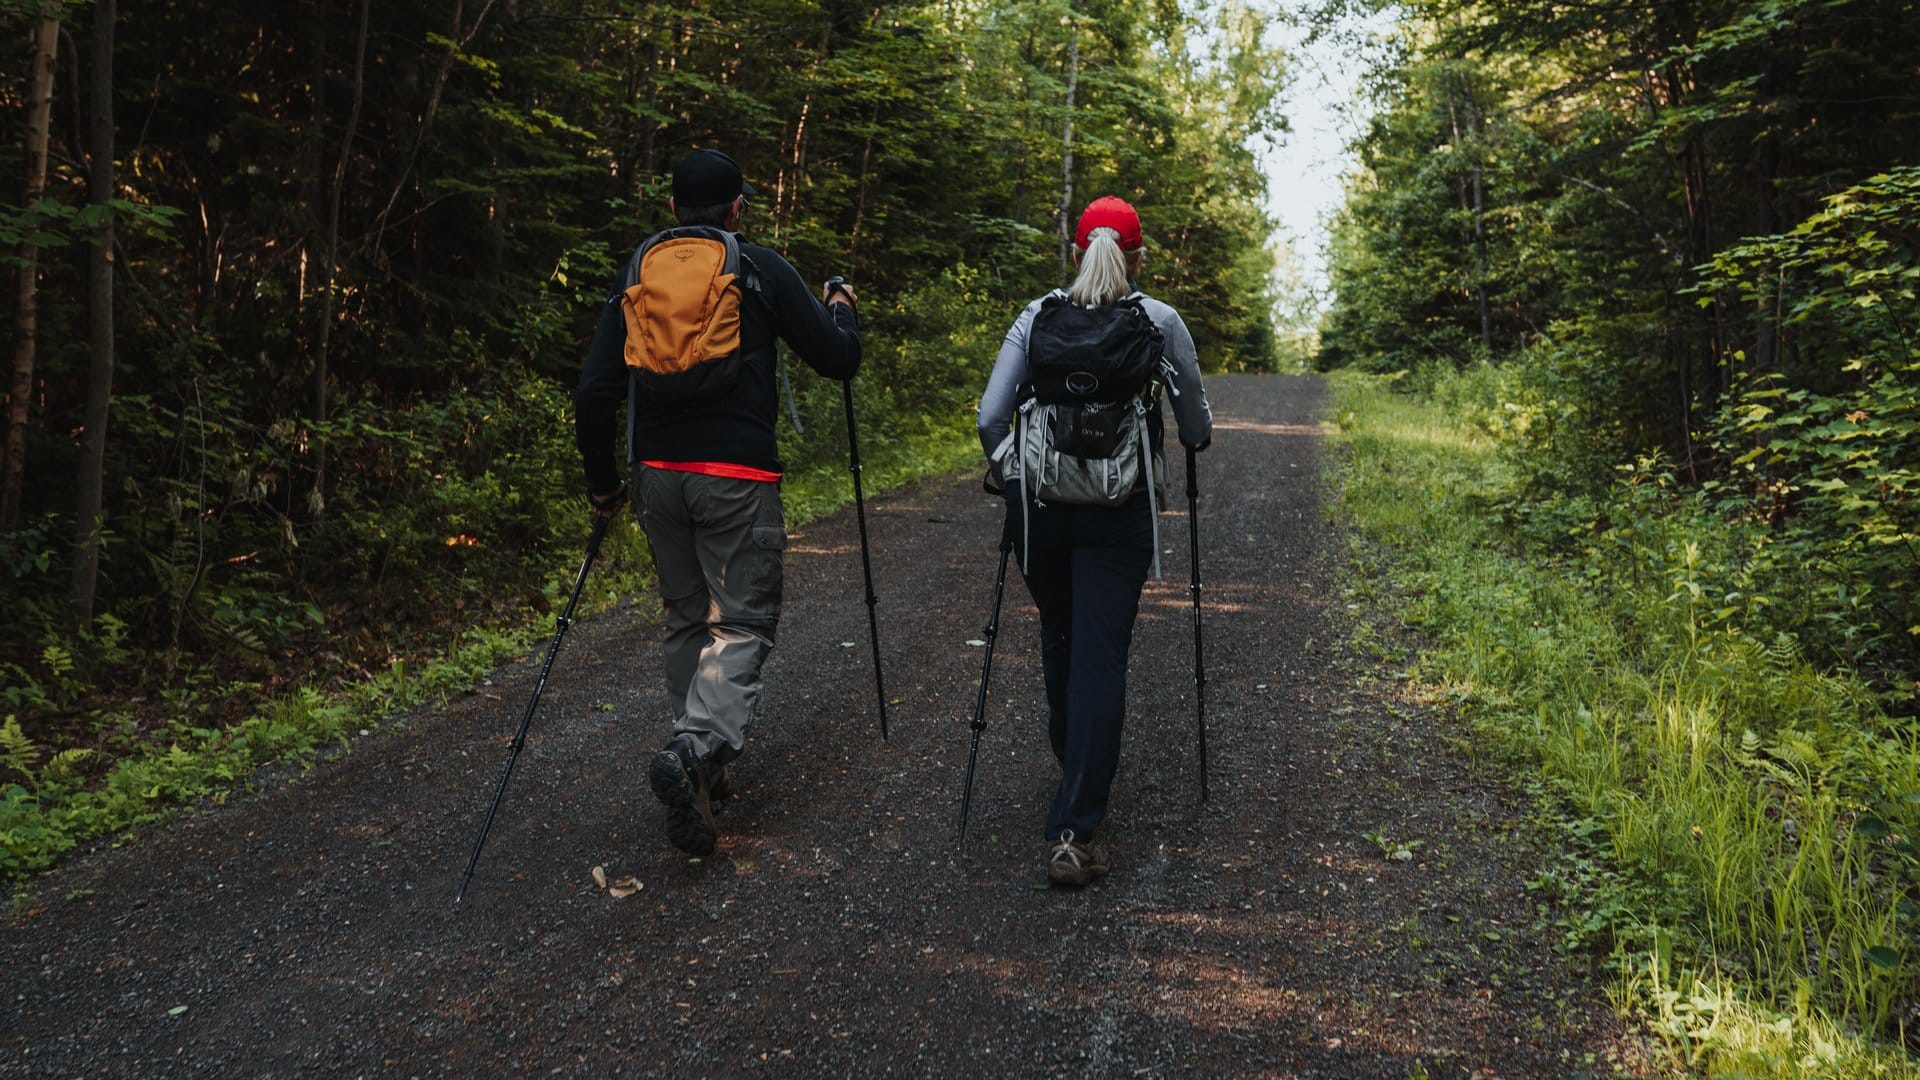 People walking along a trail with walking poles